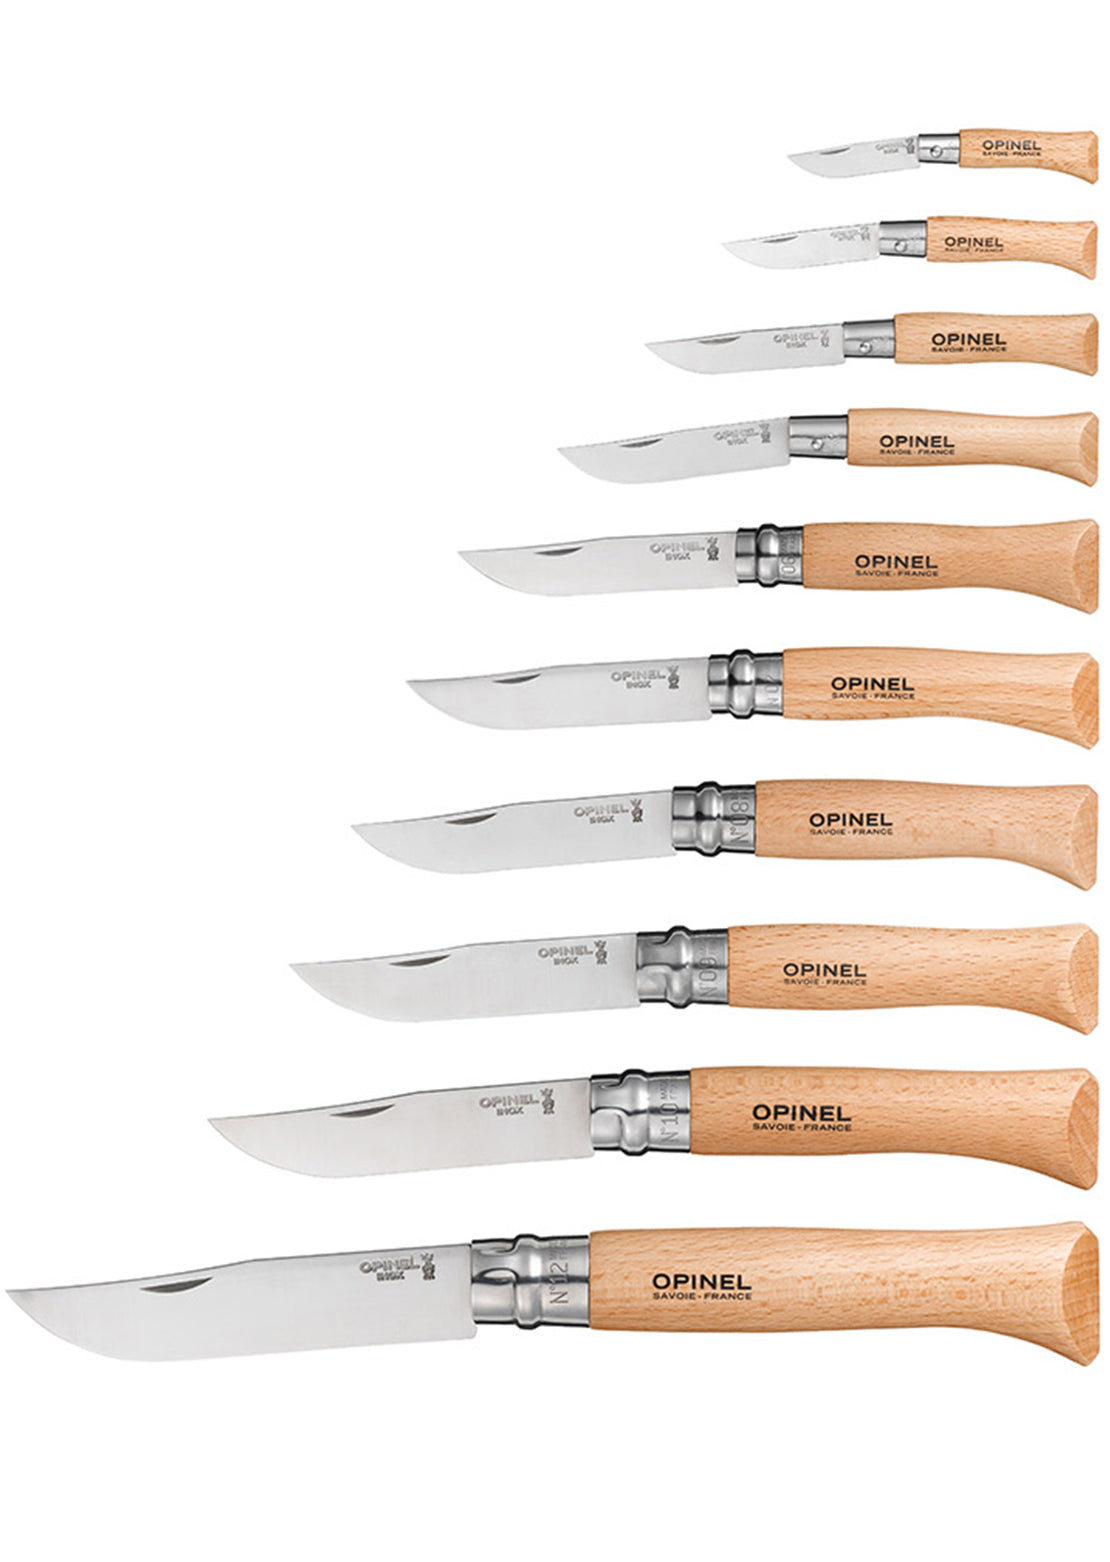 Opinel Tradition Collection 10 Stainless Steel Knives Box Set Beech Wood